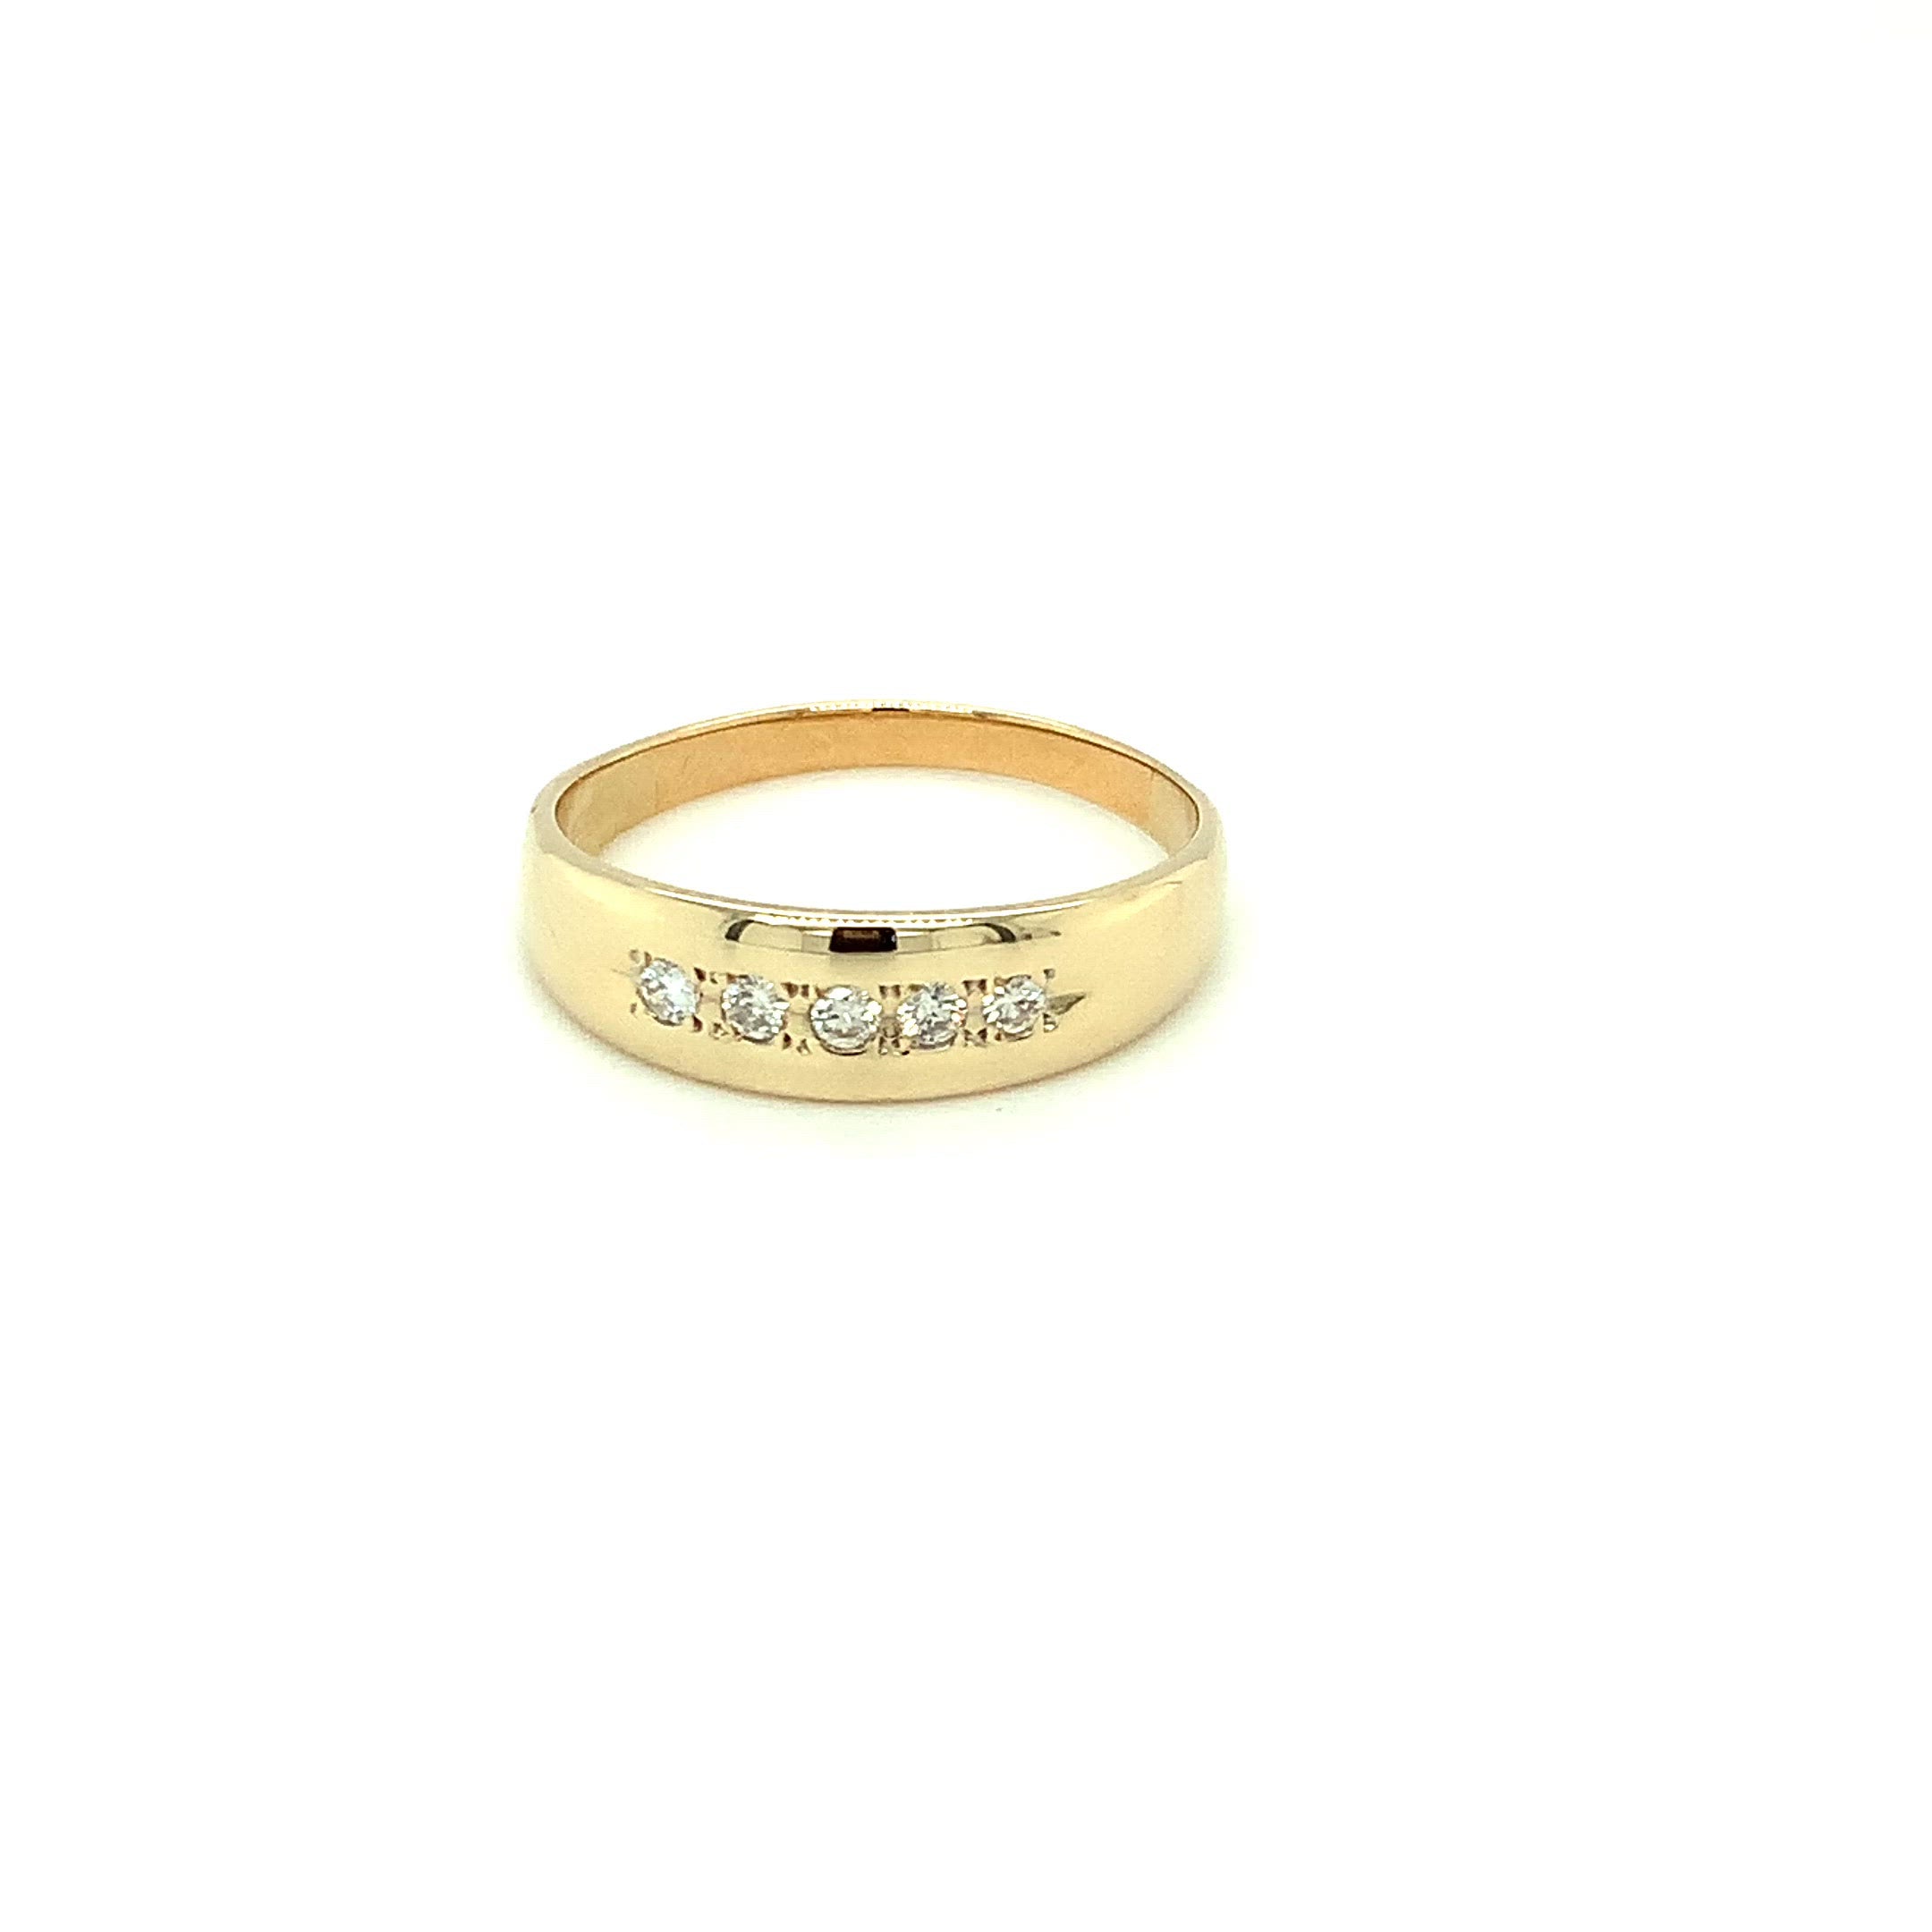 Natural Diamond Ring 14K Solid Gold .30tcw Men's Ring Band Ring Wedding Band Diamond Band Cocktail Ring Statement Ring Gold Ring Gold Band